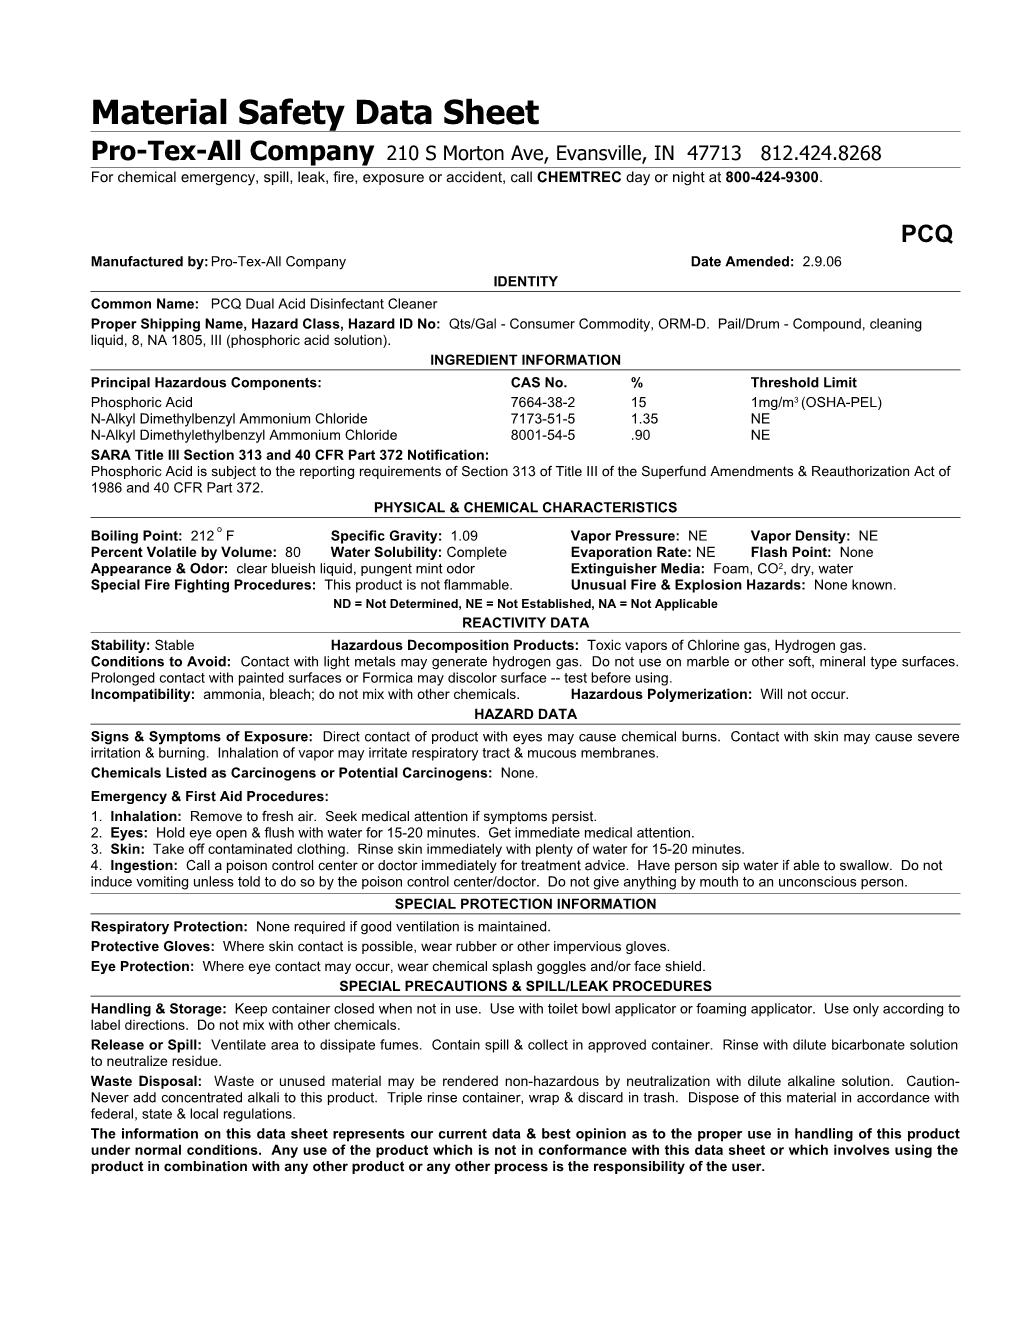 Material Safety Data Sheet s77